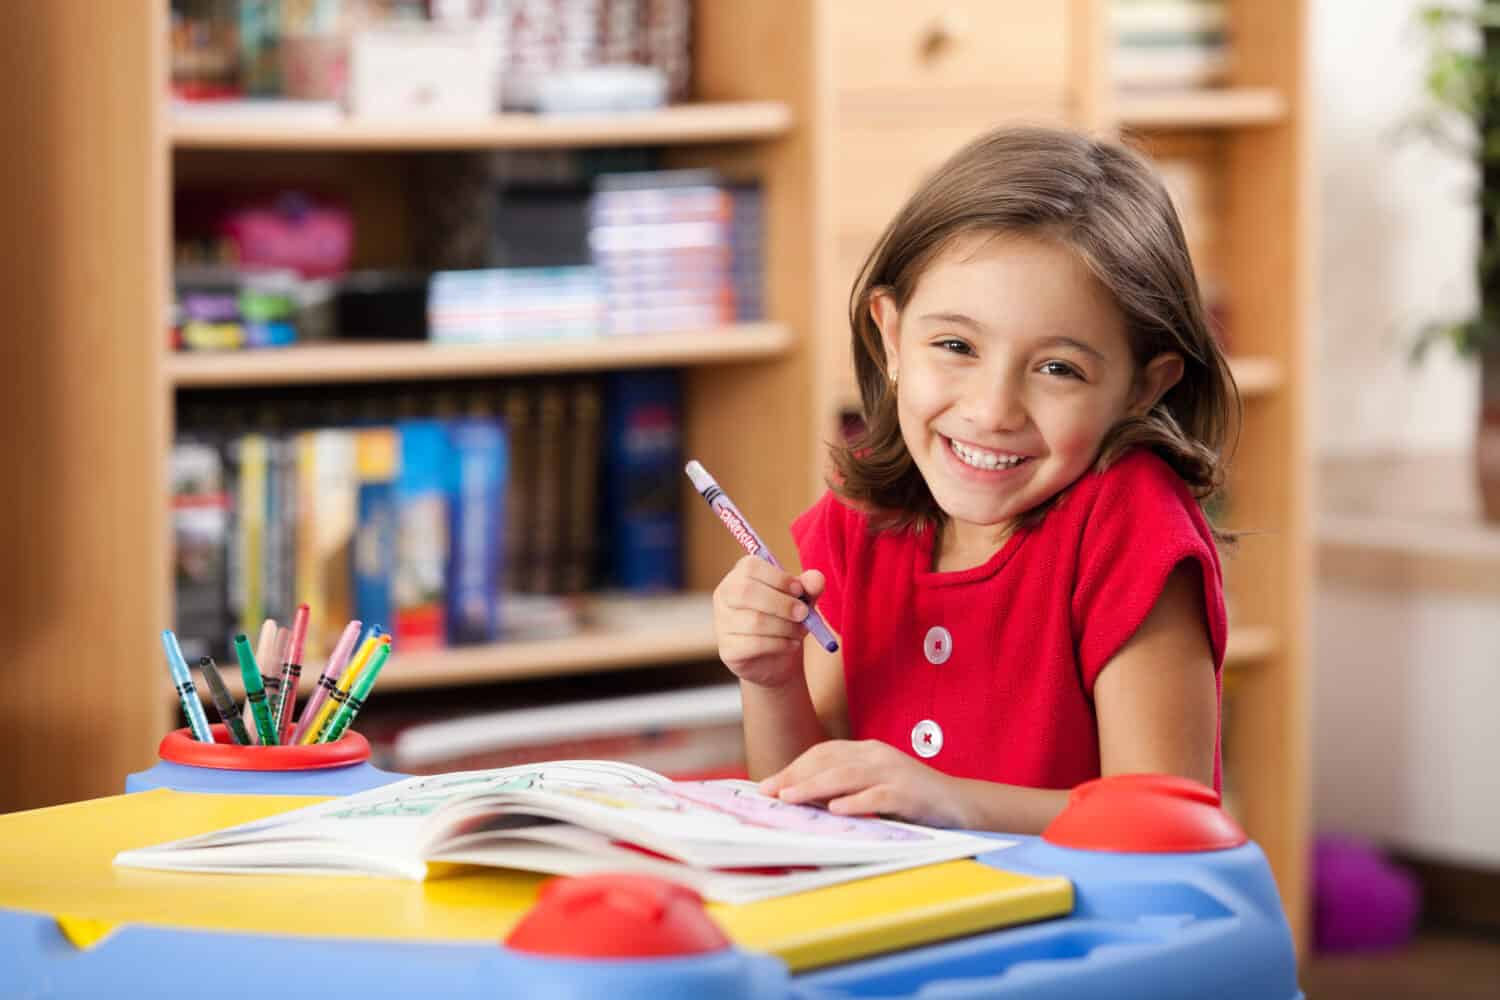 Little girl drawing on her book and having fun at playtable. Child learning to color at home or kindergarden.